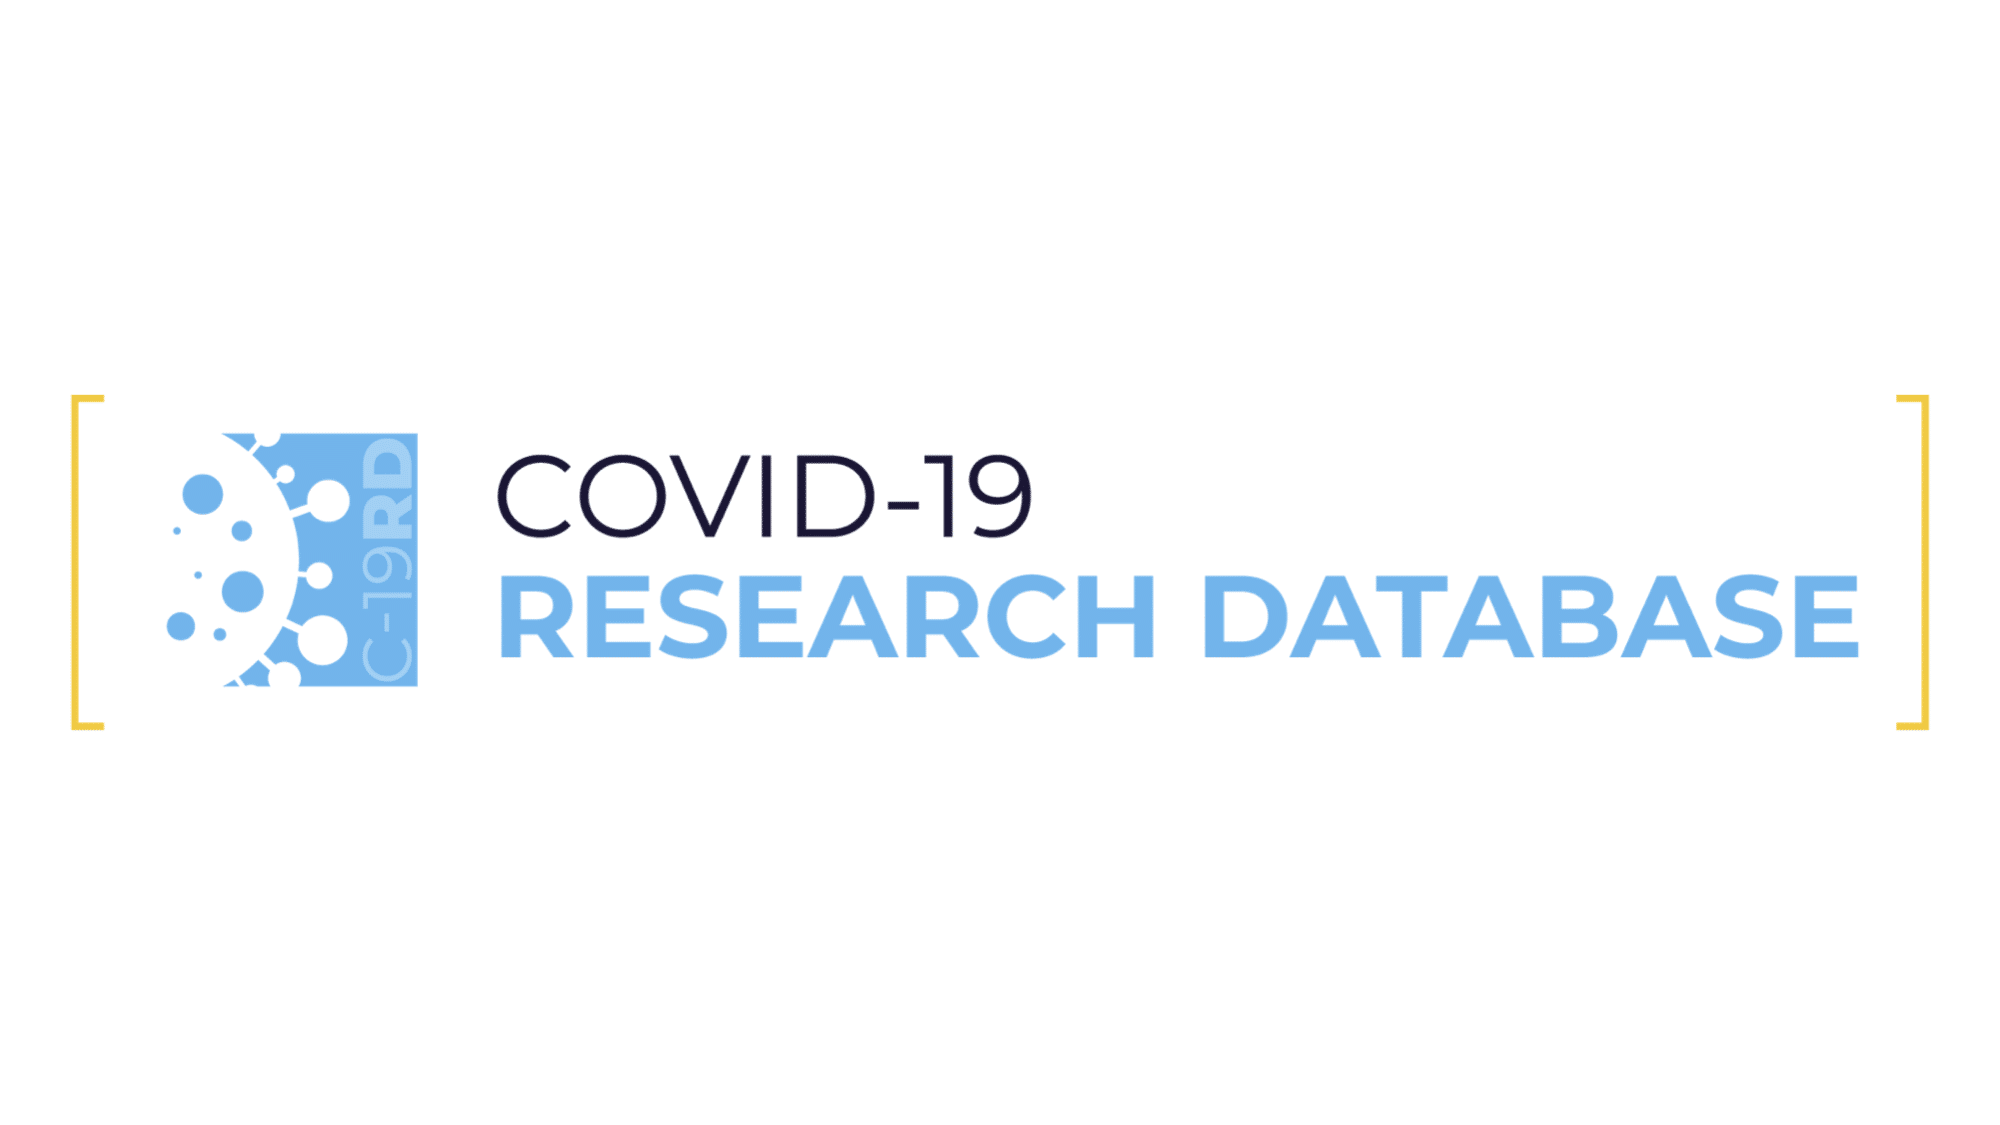 Leading Healthcare Companies Announce COVID-19 Research Database